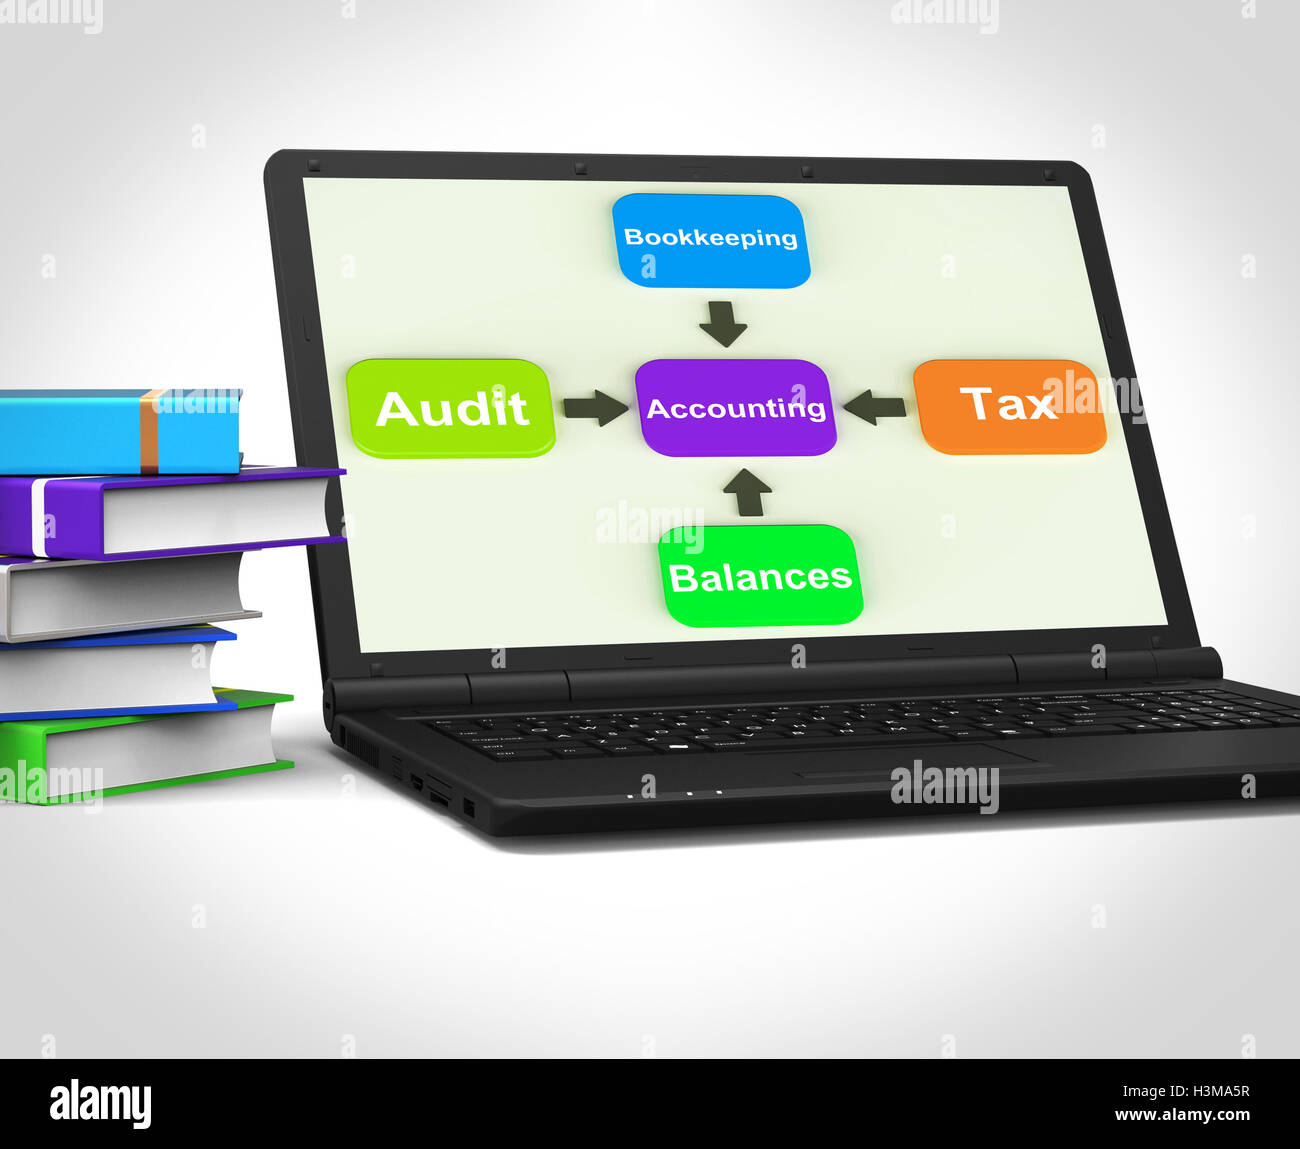 Accounting Laptop Shows Accountant Balances And Bookkeeping Stock Photo